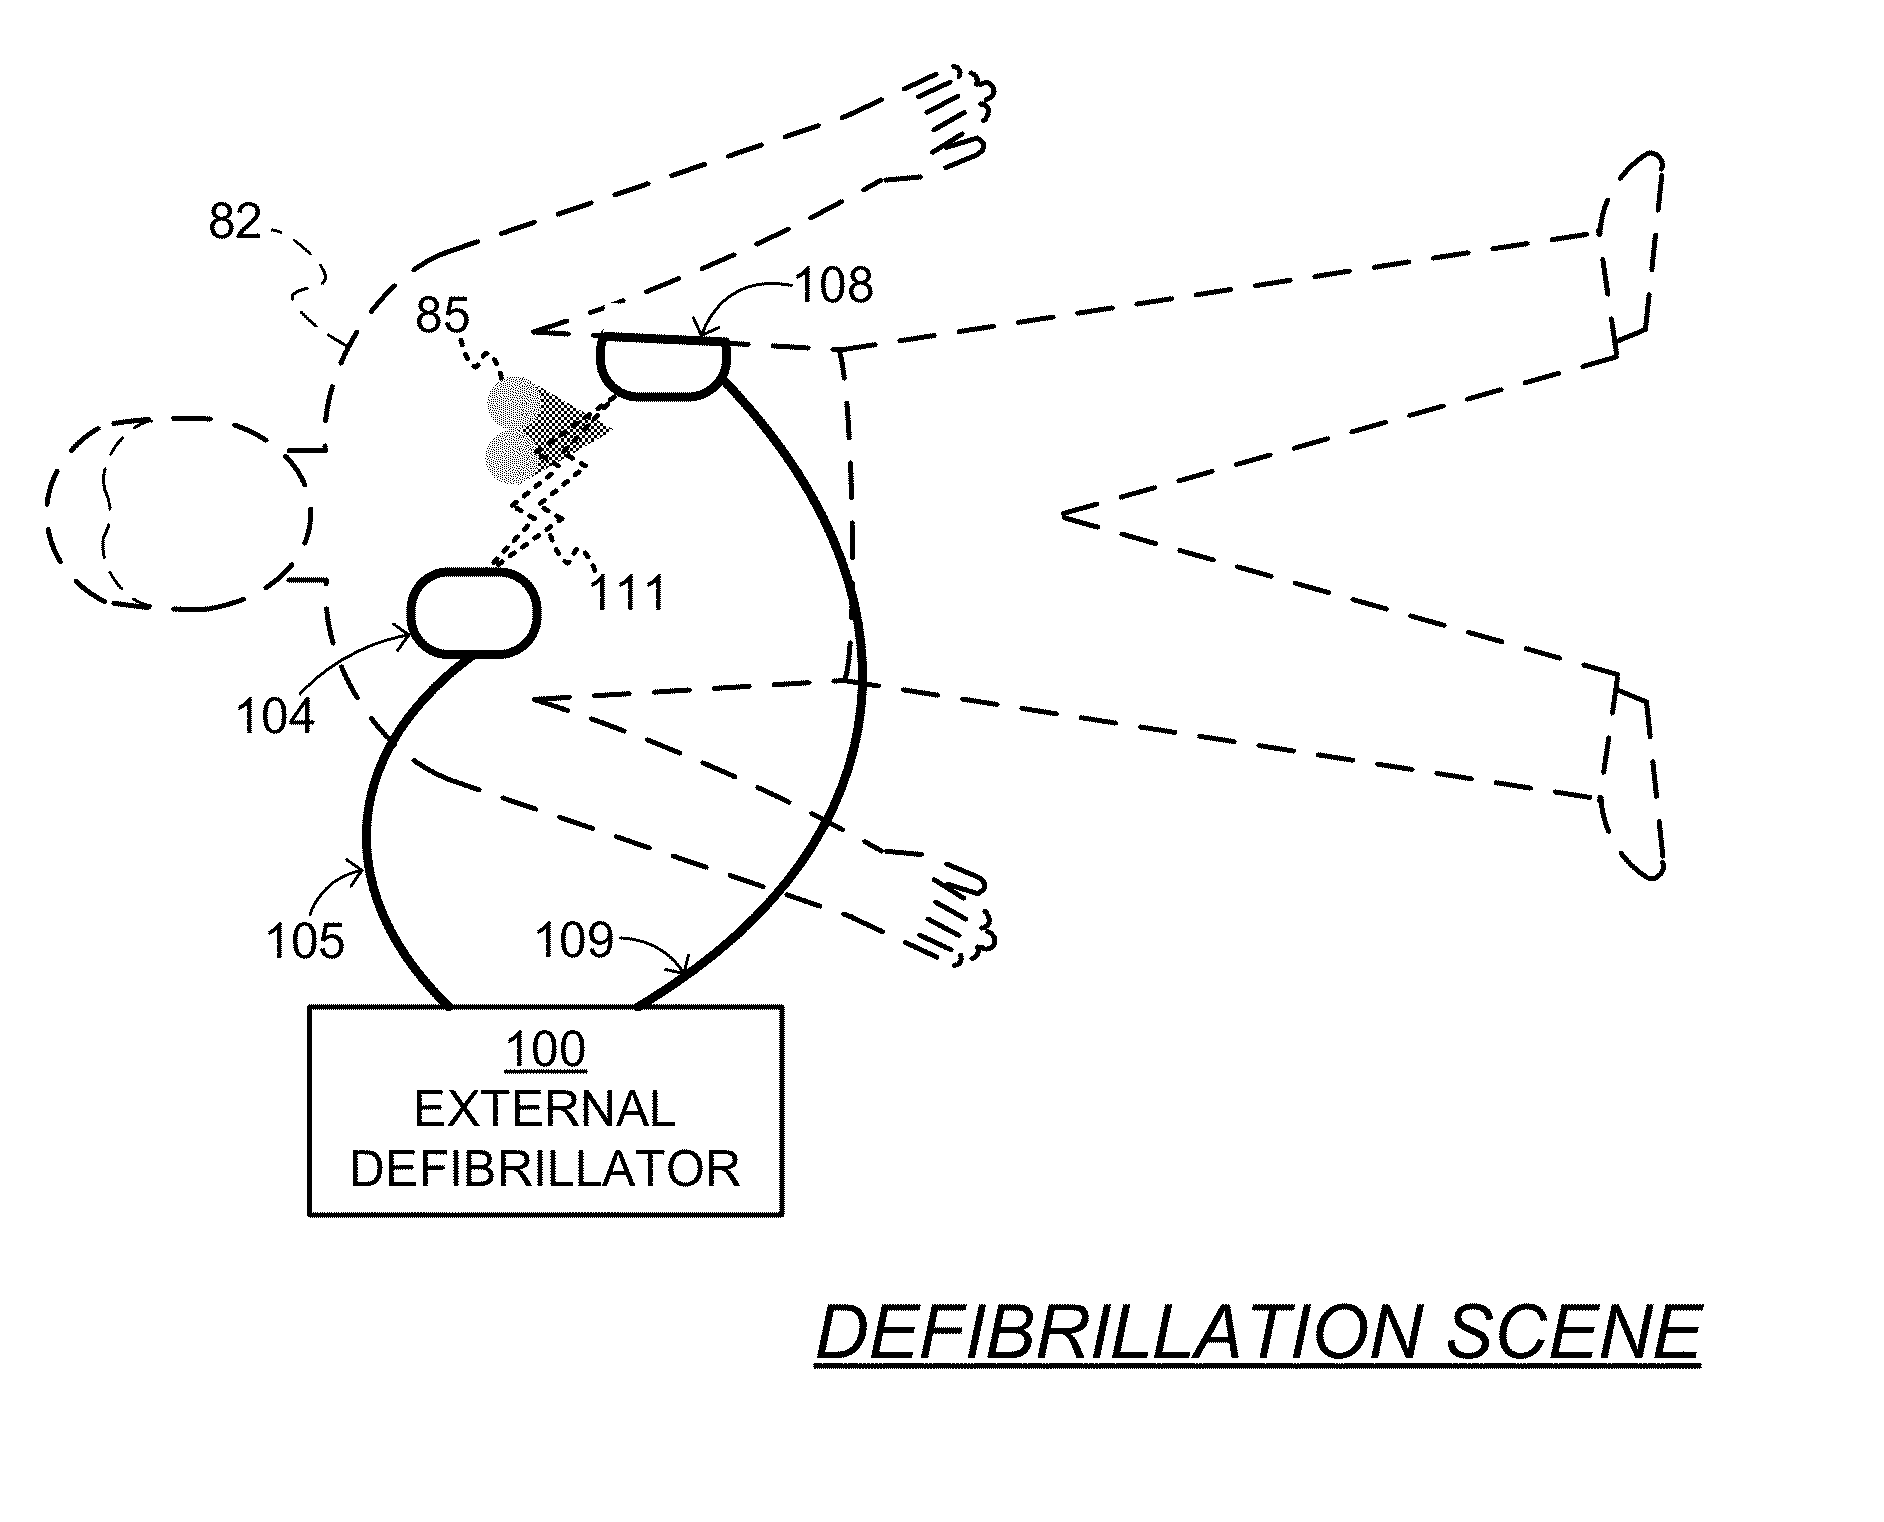 System and method for electrocardiogram analysis and optimization of cardiopulmonary resuscitation and therapy delivery